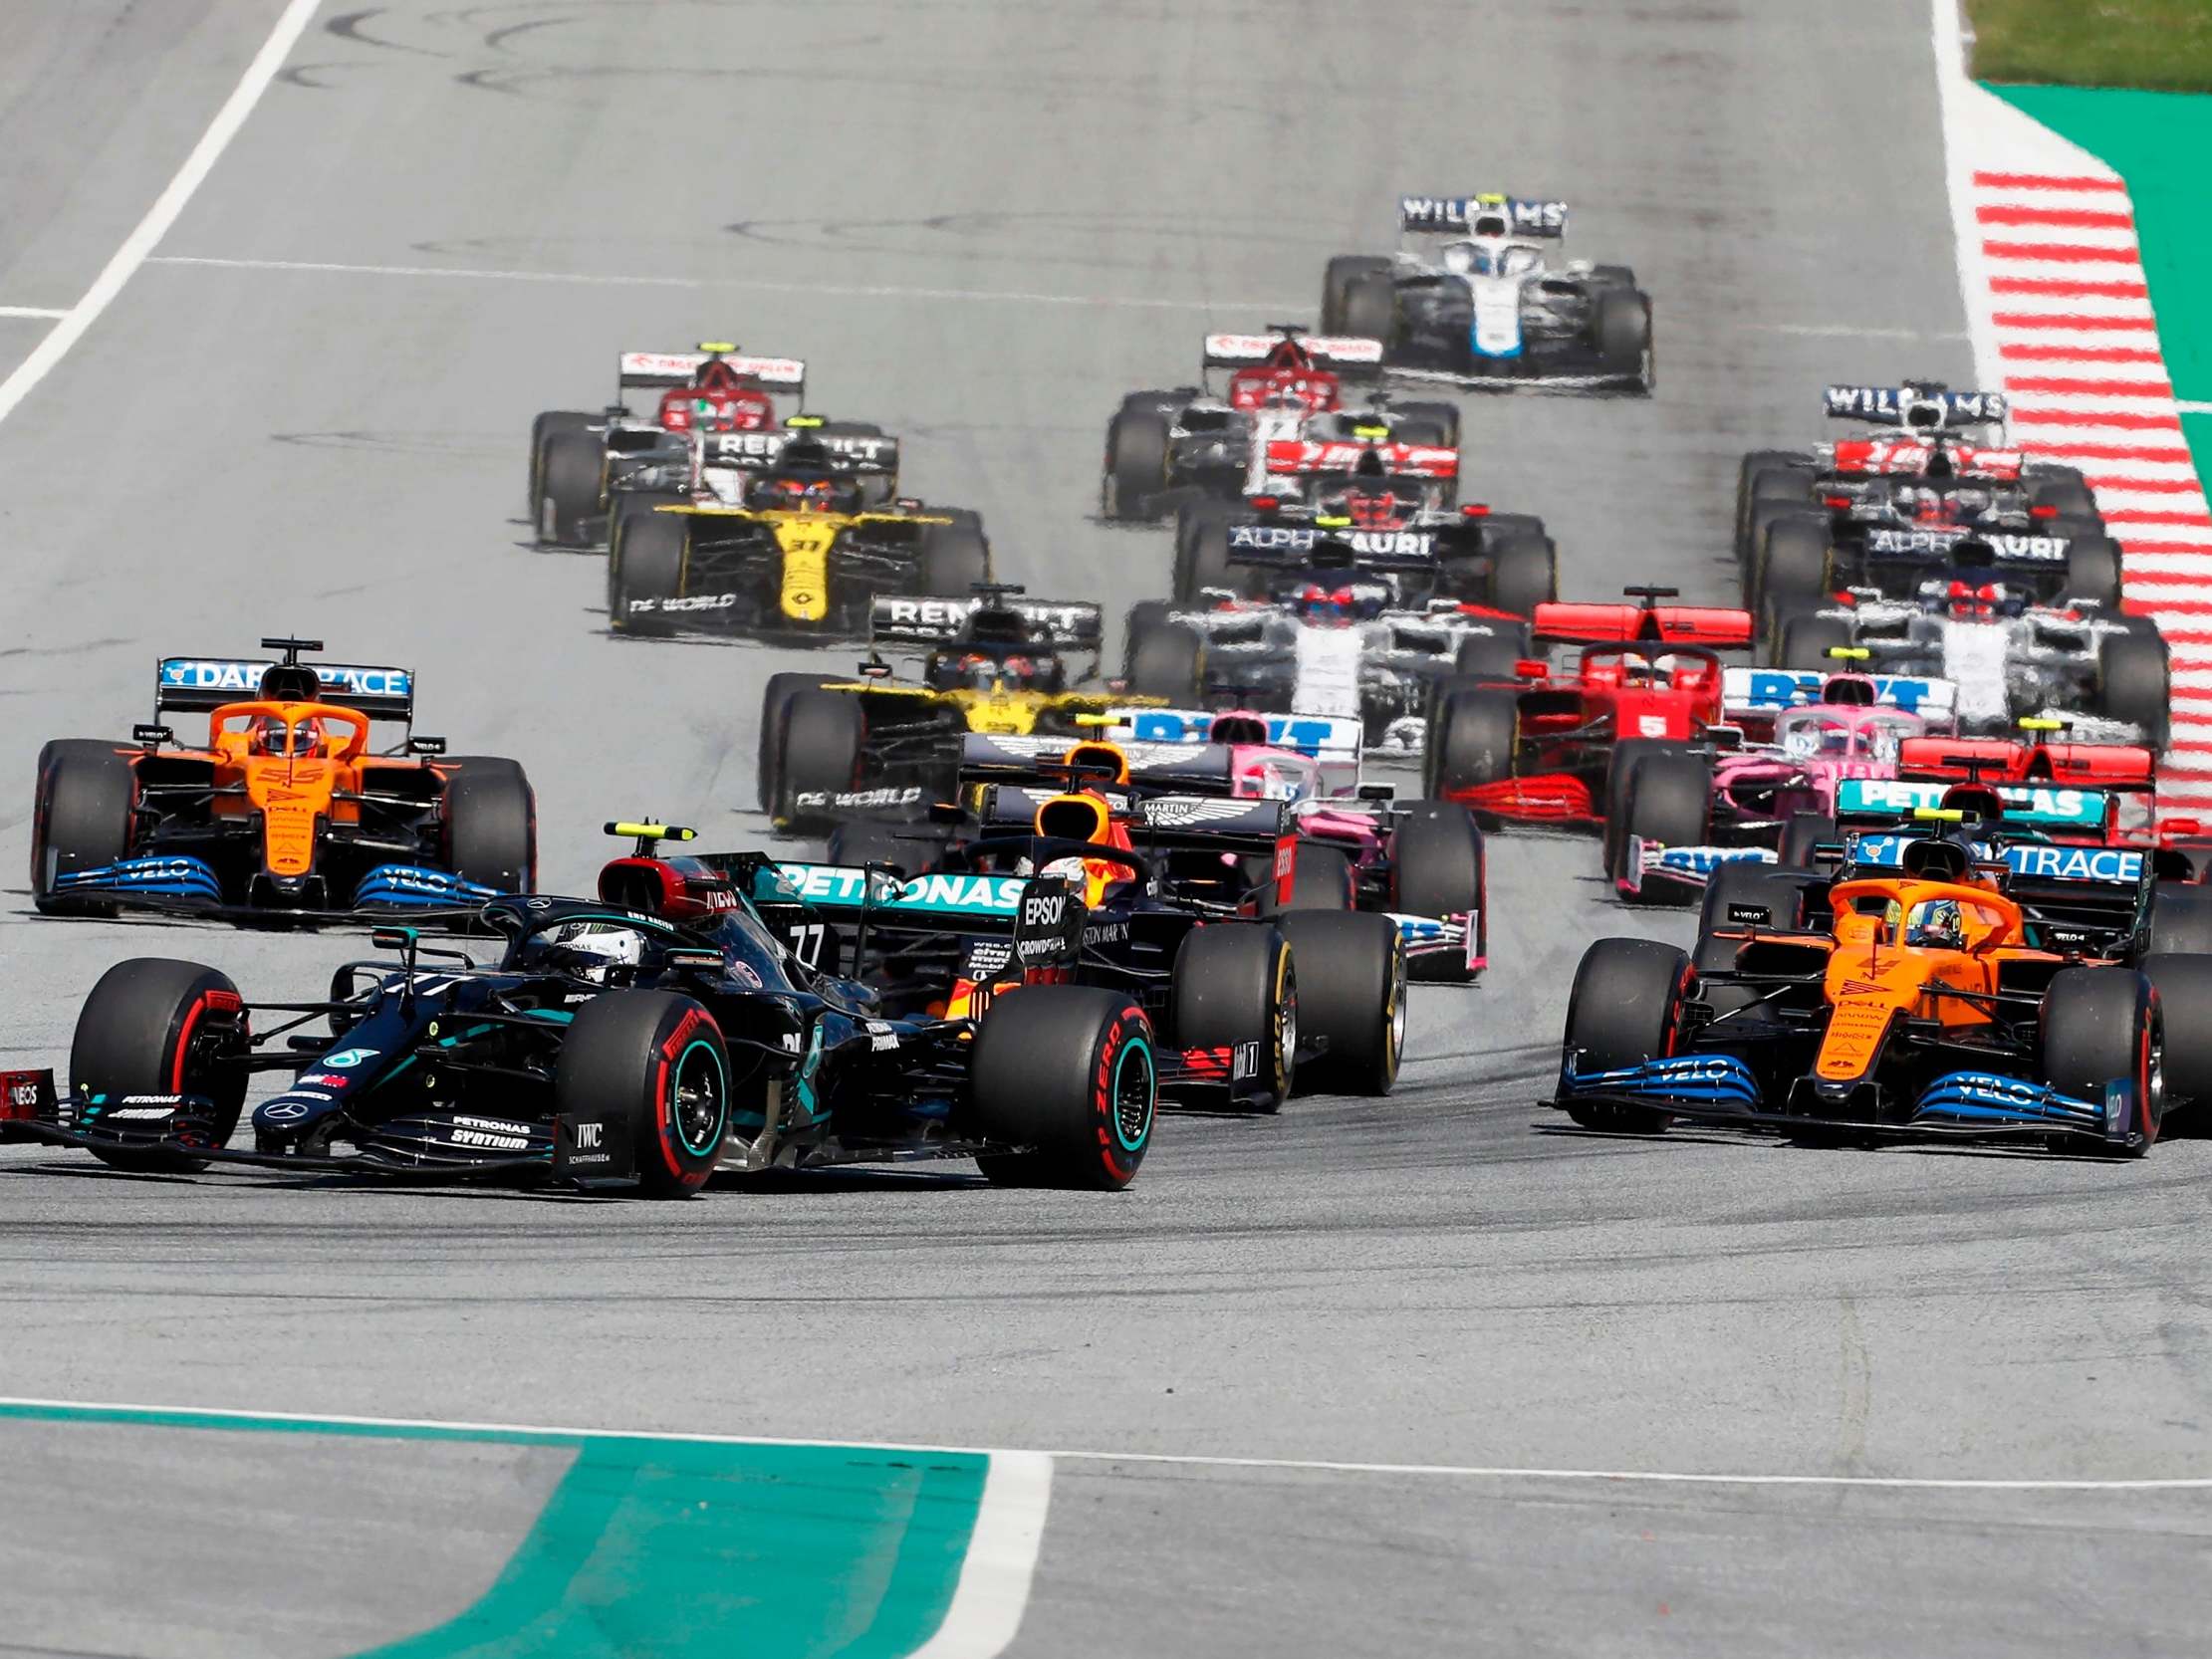 It was an action-packed race in Austria